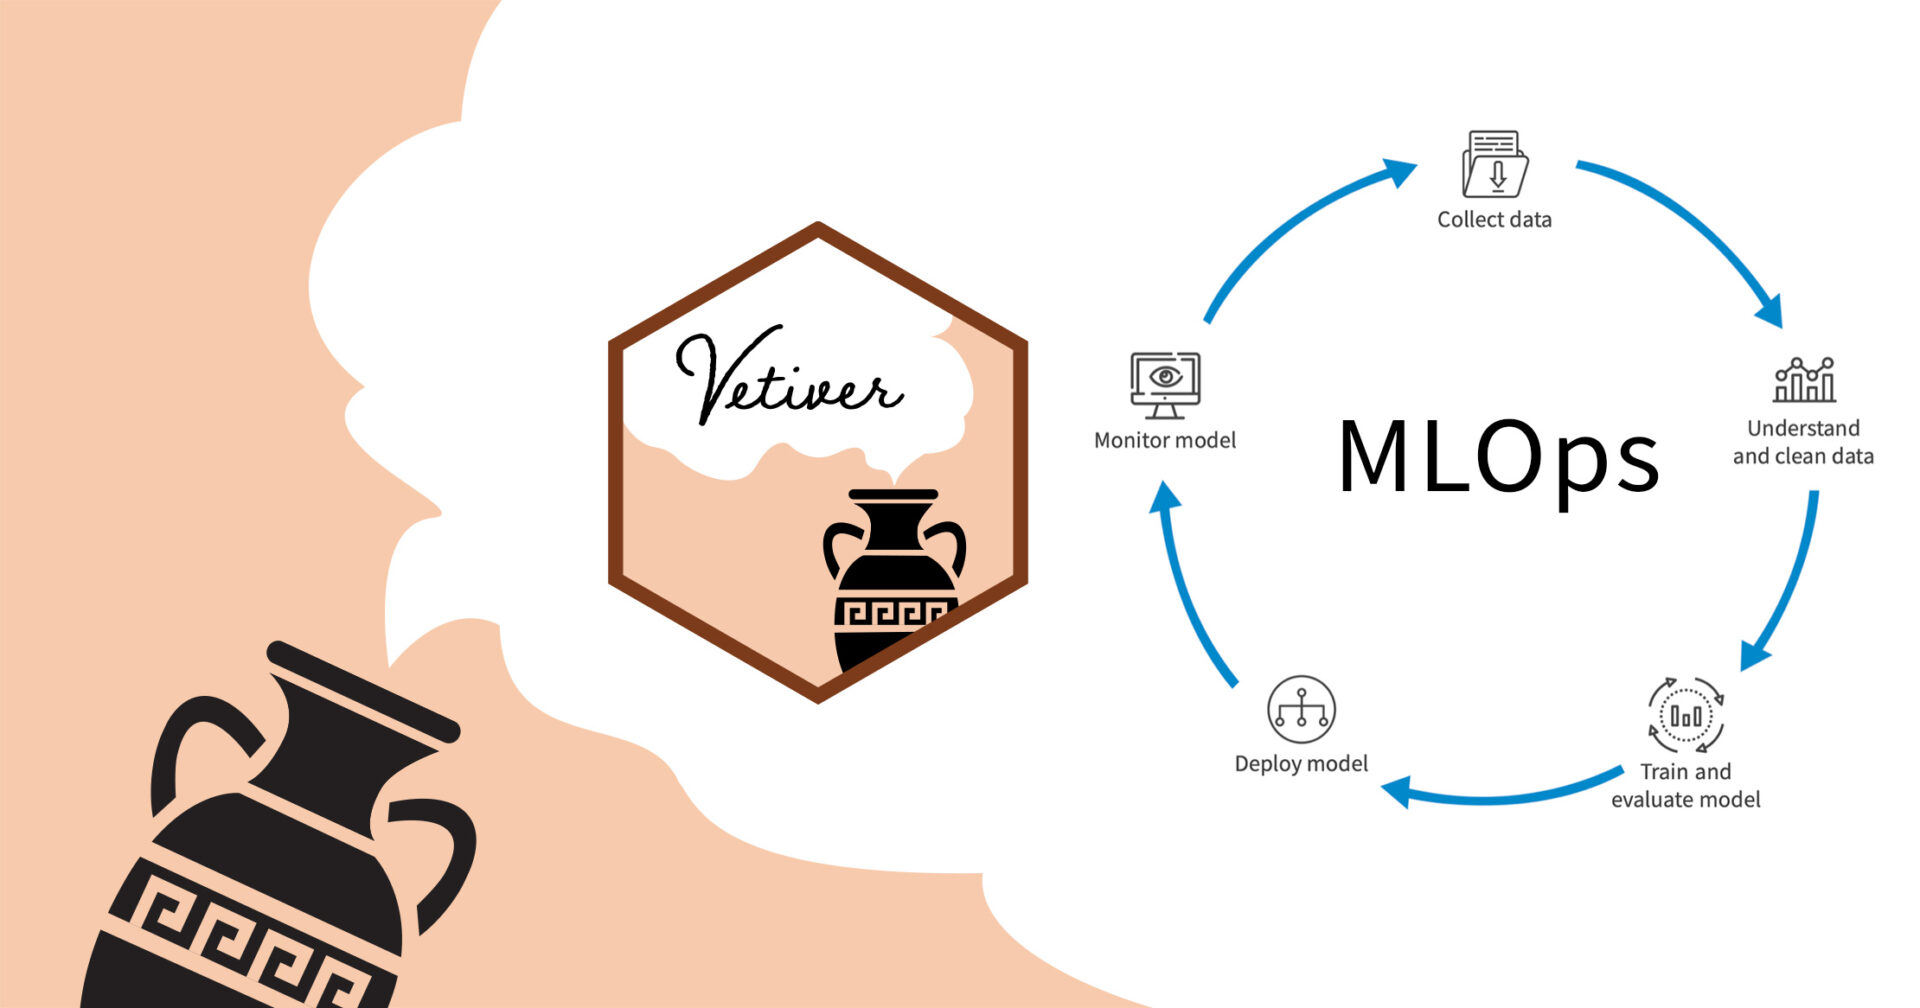 The vetiver logo next to a circular diagram of the MLOps cycle. In this cycle, we collect data, understand and clean the data, train and evaluate a model, deploy the model, and monitor the deployed model. Monitoring can then lead back to collecting more data.